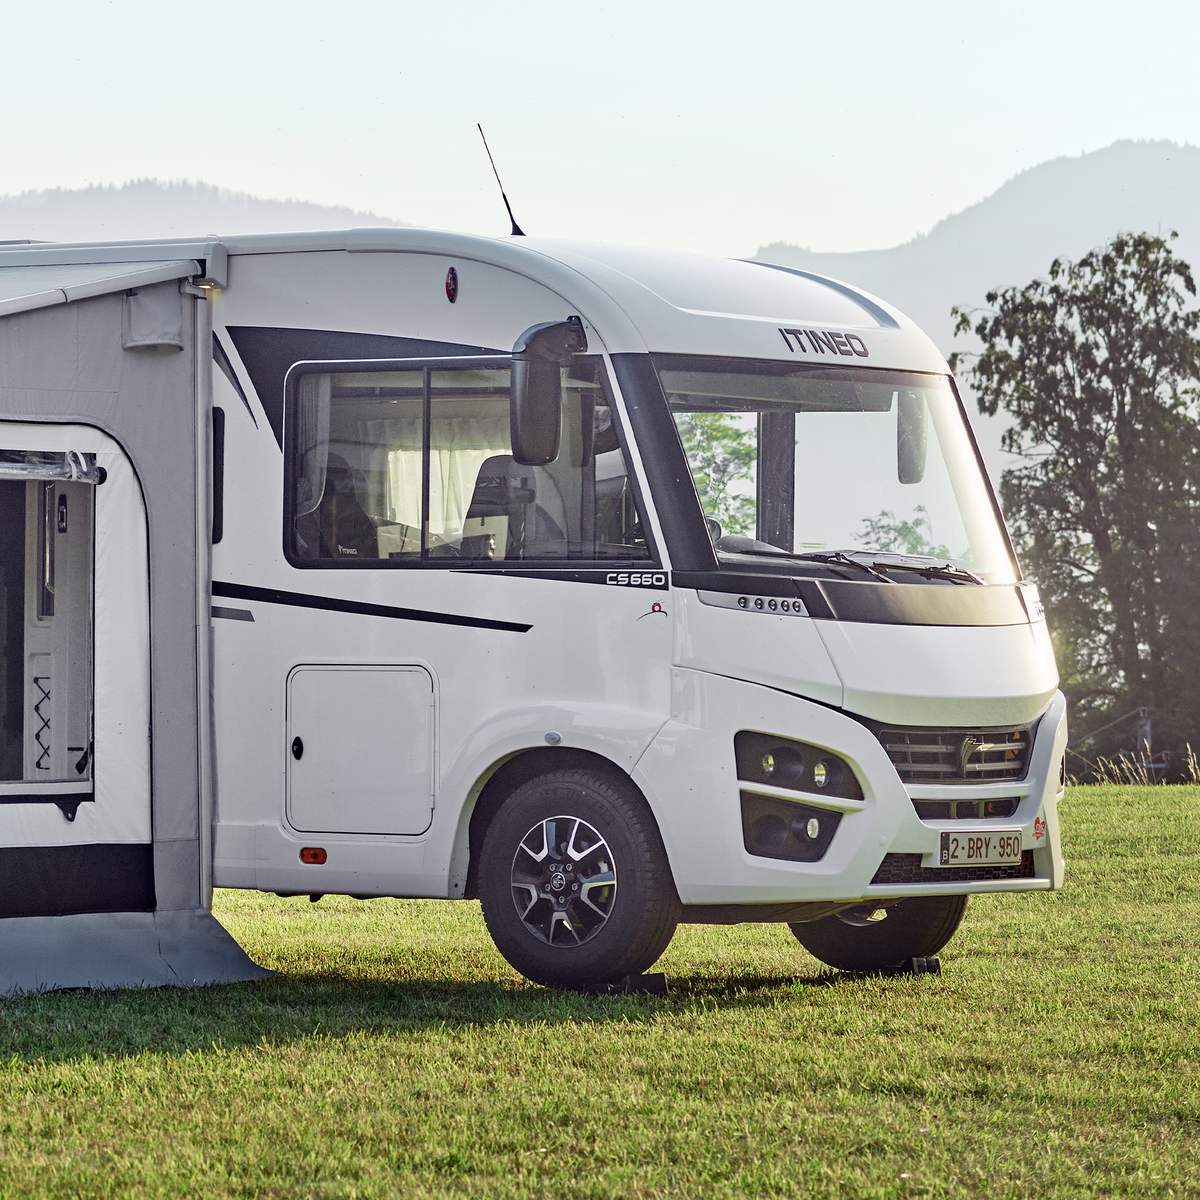 A motorhome is parked in the grass with a wheel on the Thule leveler.